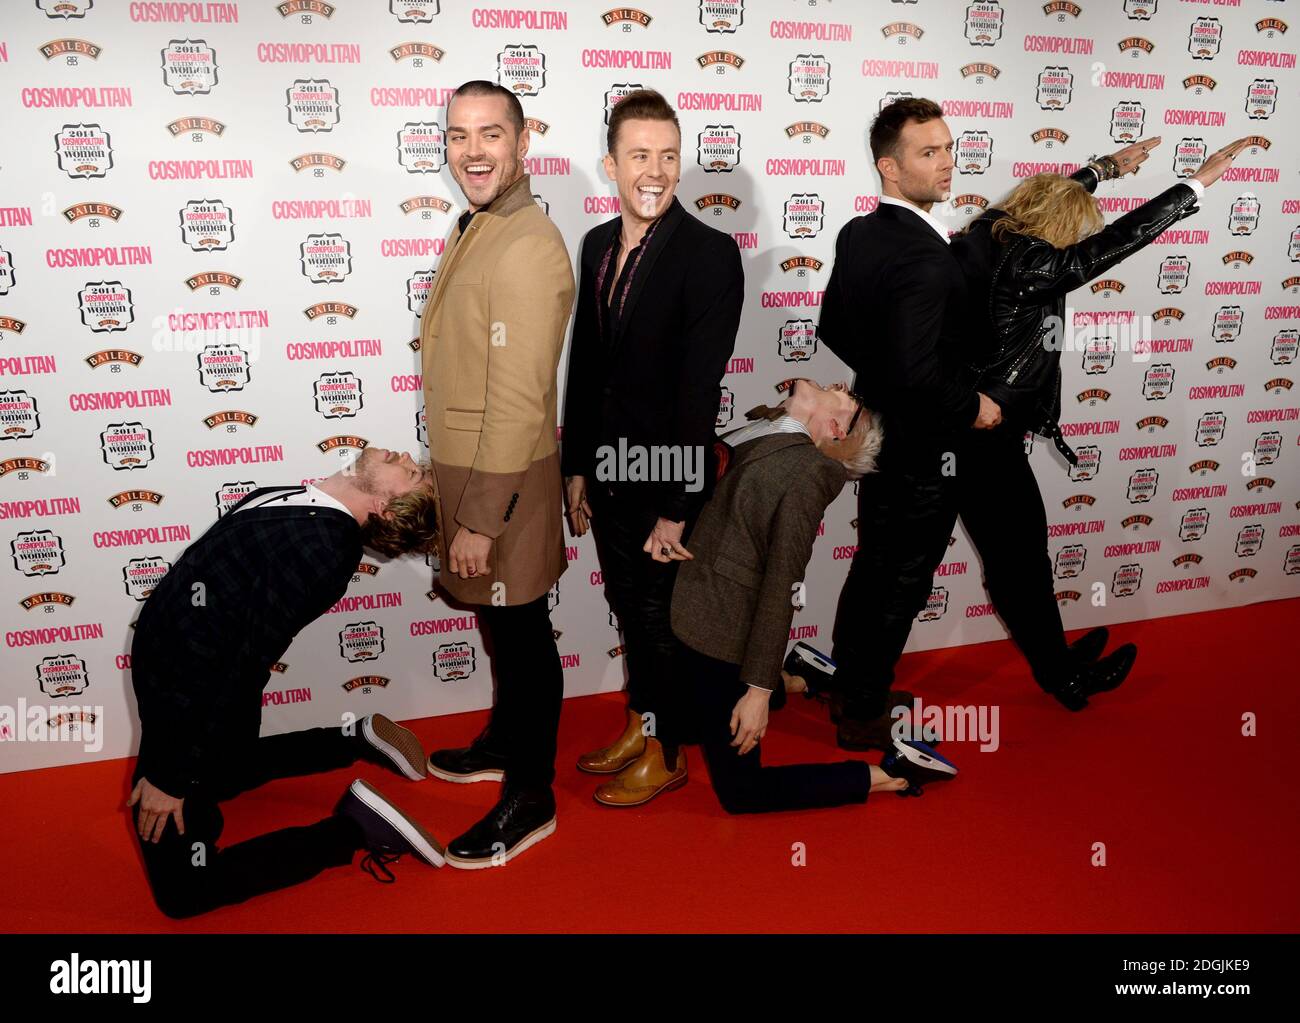 (left to right) James Bourne, Matt Willis, Danny Jones, Tom Fletcher, Harry Judd and Dougie Poynter of McBusted arriving at The Cosmopolitan Ultimate Women of the Year Awards, at the Victoria & Albert Museum, London Stock Photo